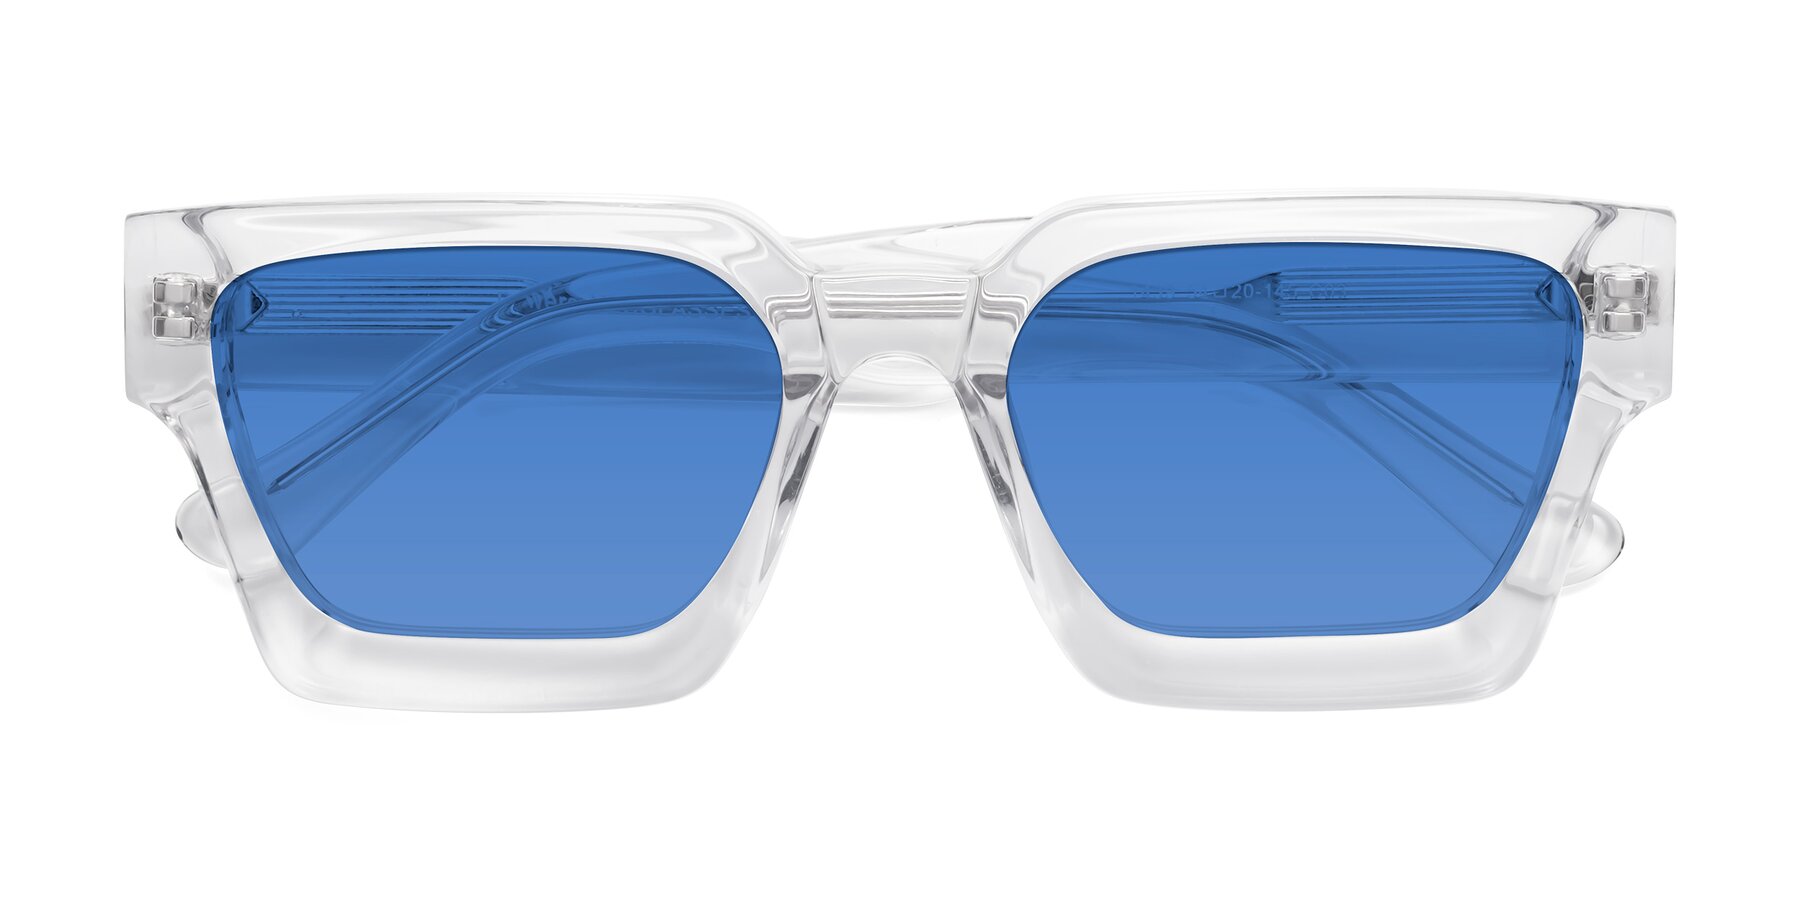 Clear Thick Geek-Chic Geometric Gradient Sunglasses with Blue Sunwear Lenses